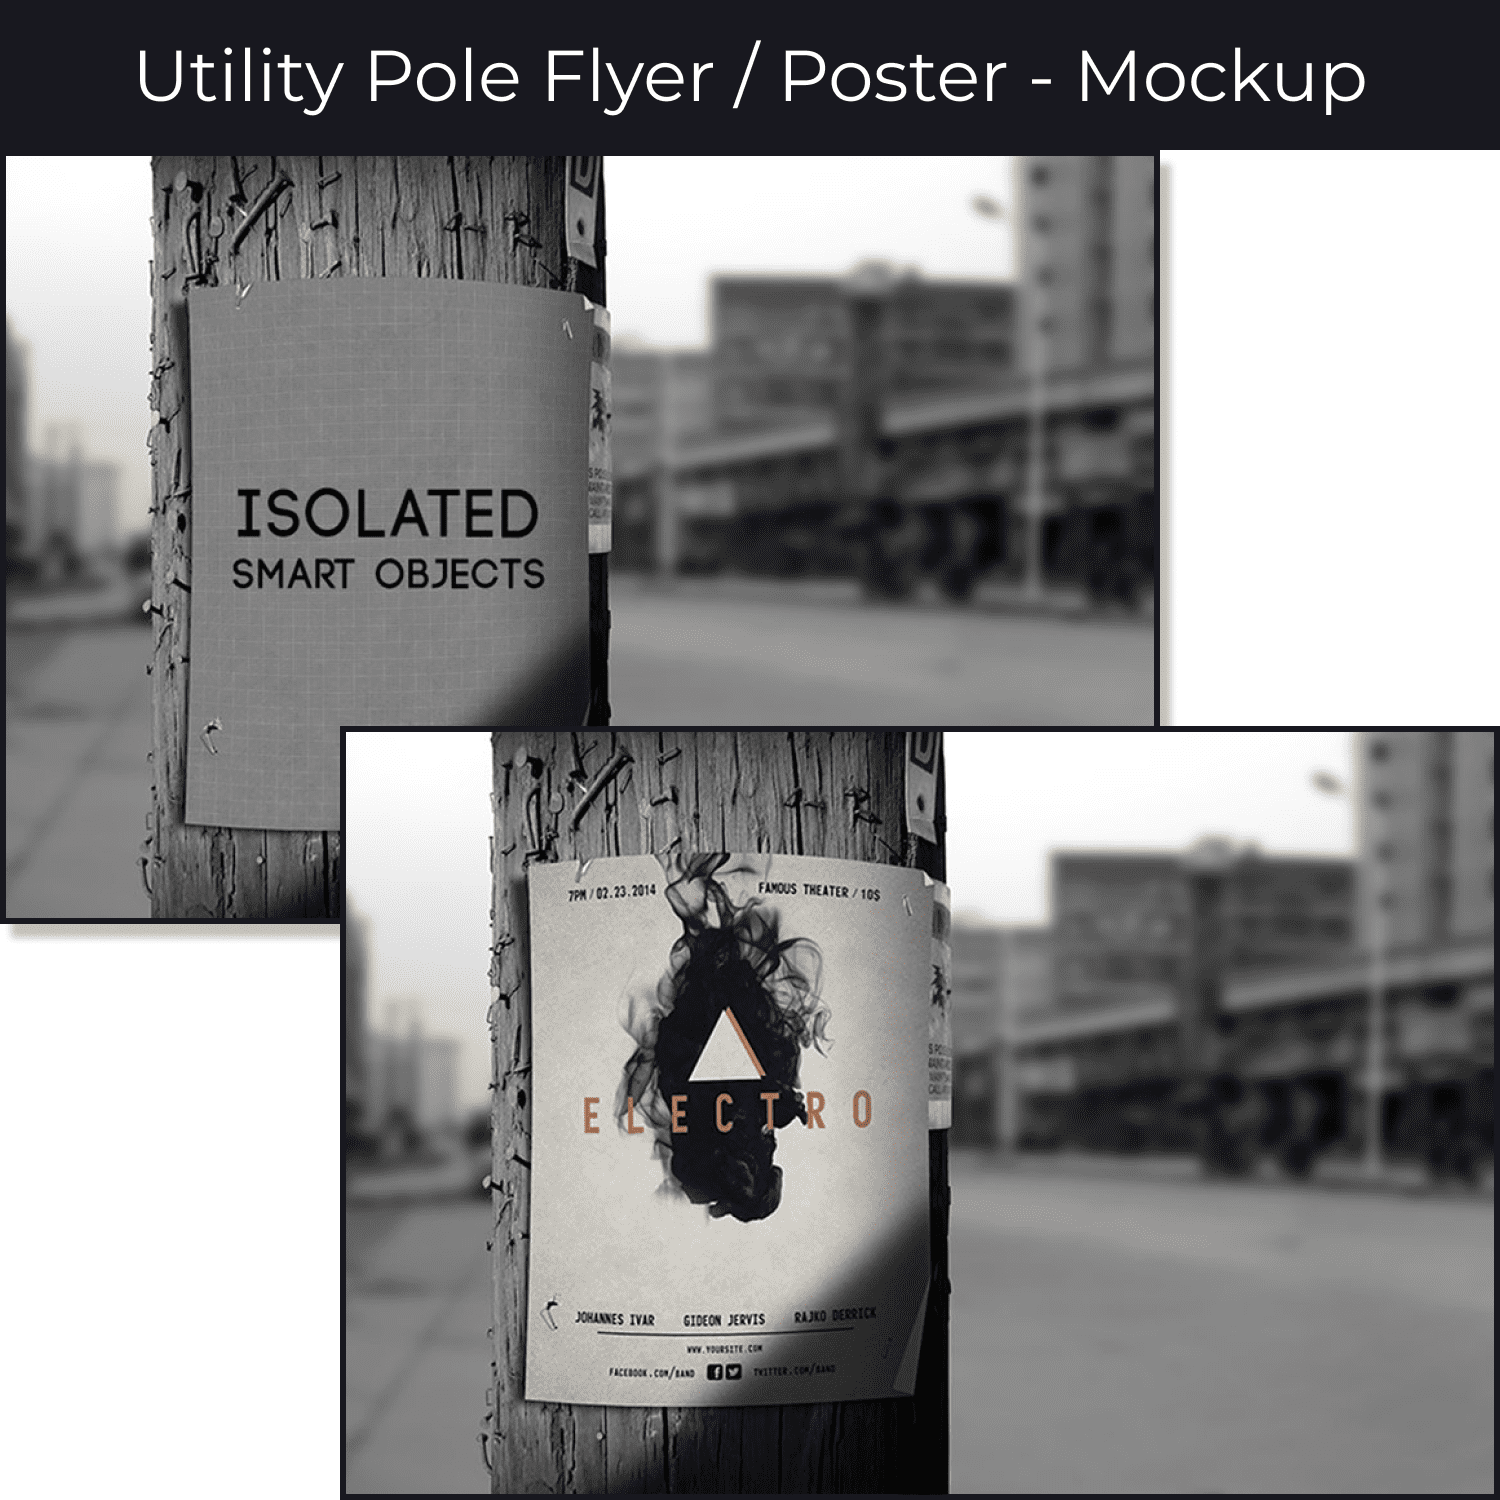 Utility Pole Flyer Poster Mockup cover image.